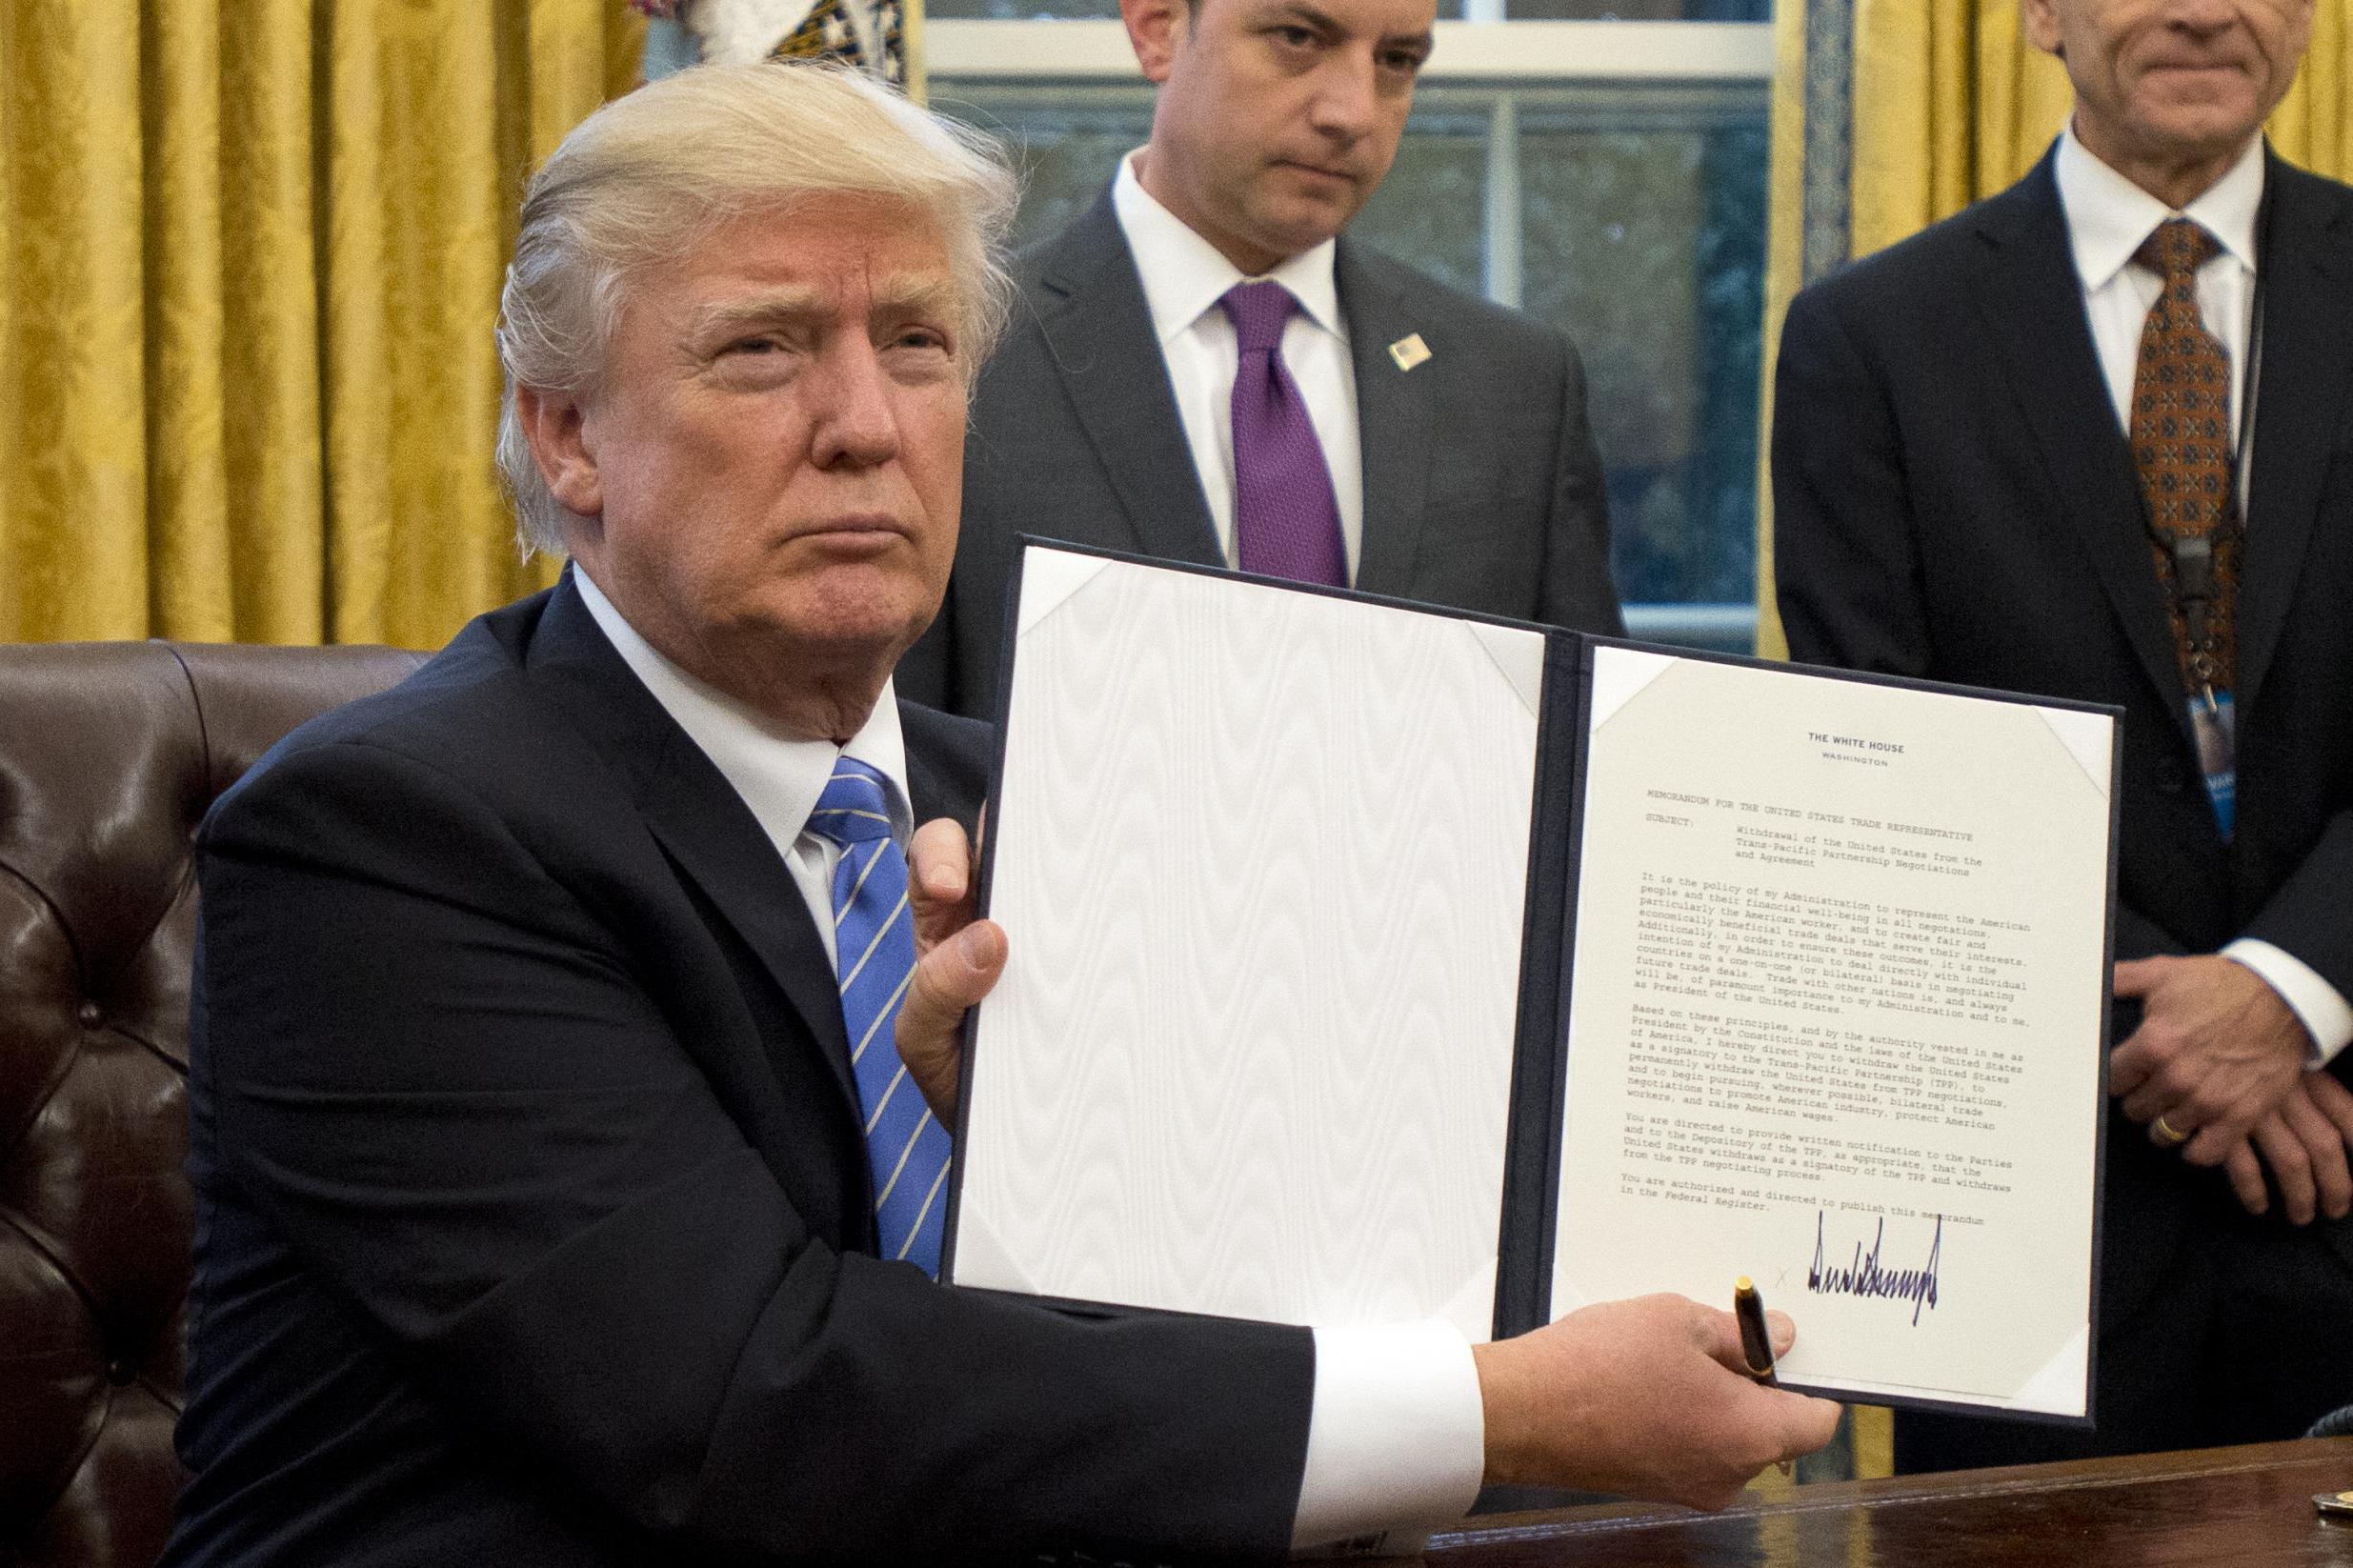 Donald Trump has started his term with a number of executive orders